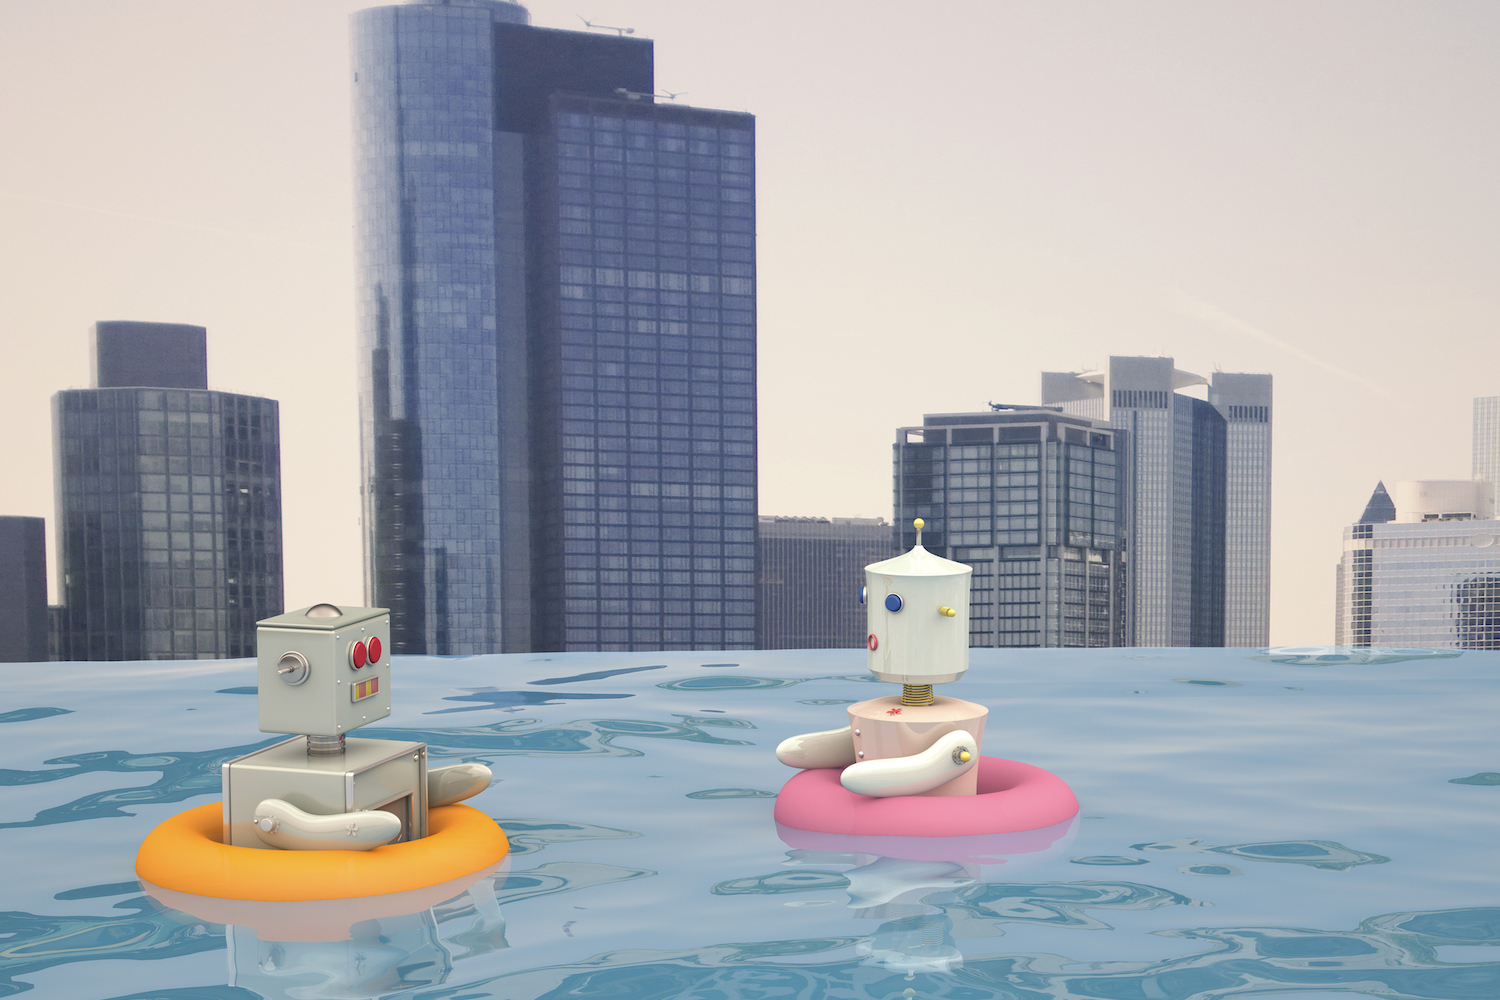 Male and female robots with floating wheels swimming in a pool in front of a city skyline, 3D rendering